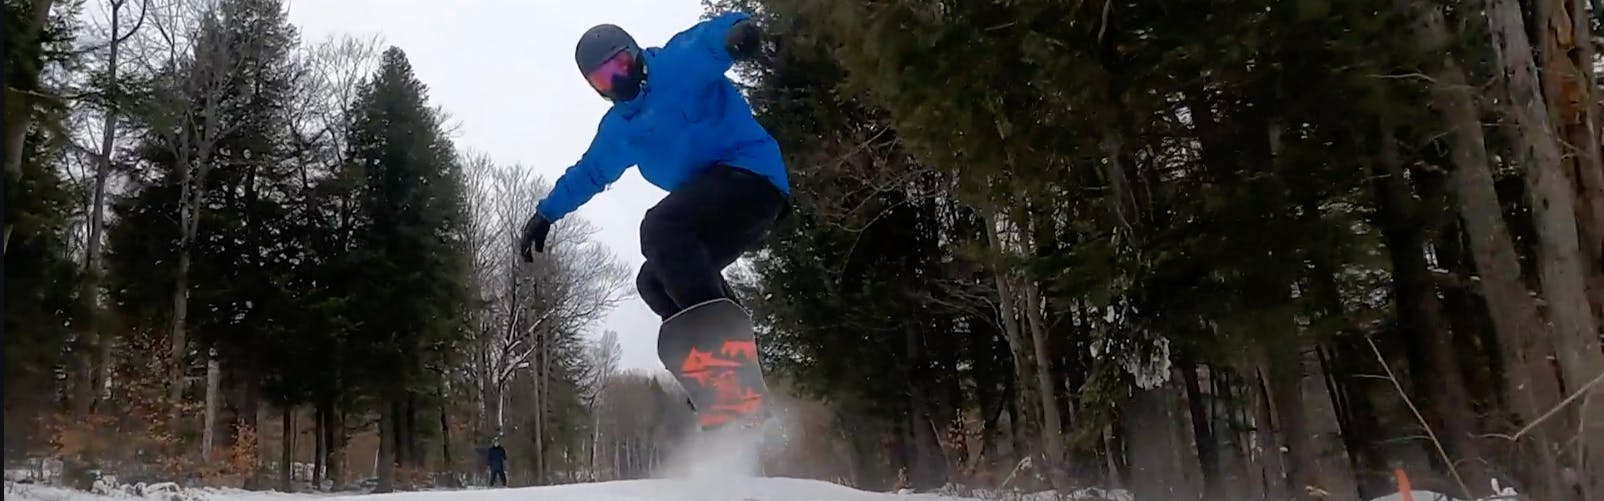 Curated expert Franco DiRienzo landing a jump with the Jones Mountain Twin snowboard